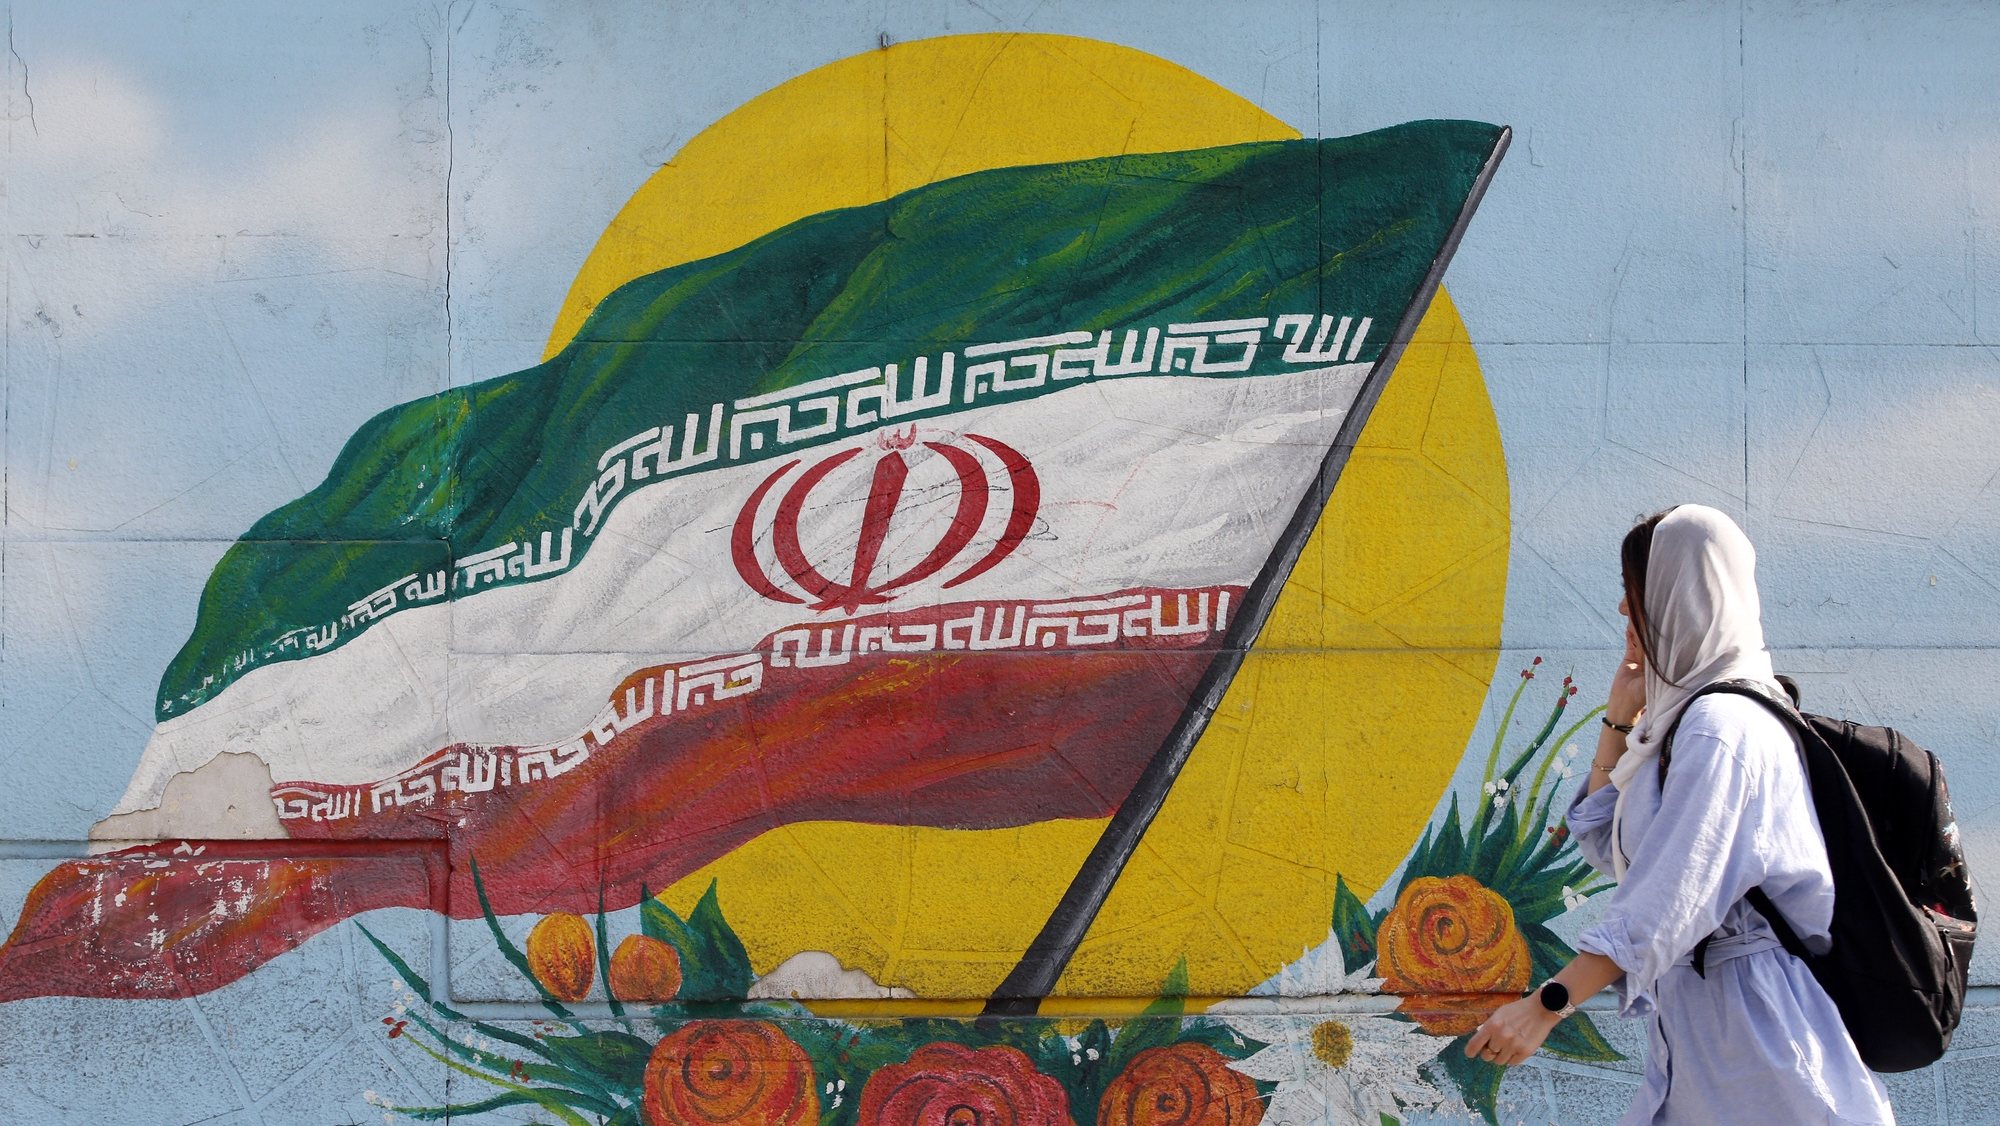 epa10295546 A woman walks past a graffiti showing the Iranian national flag in Tehran, Iran, 09 November 2022. Iran has been rocked by anti-government protests, with supporters worldwide, following the death in September 2022 of Masha Amini, a 22-year-old girl who died while in police custody after being detained for breaking Iran&#039;s strict dress code for women. Iranian leaders condemned the protests and accused the United States and Israel of planning the uprising.  EPA/ABEDIN TAHERKENAREH